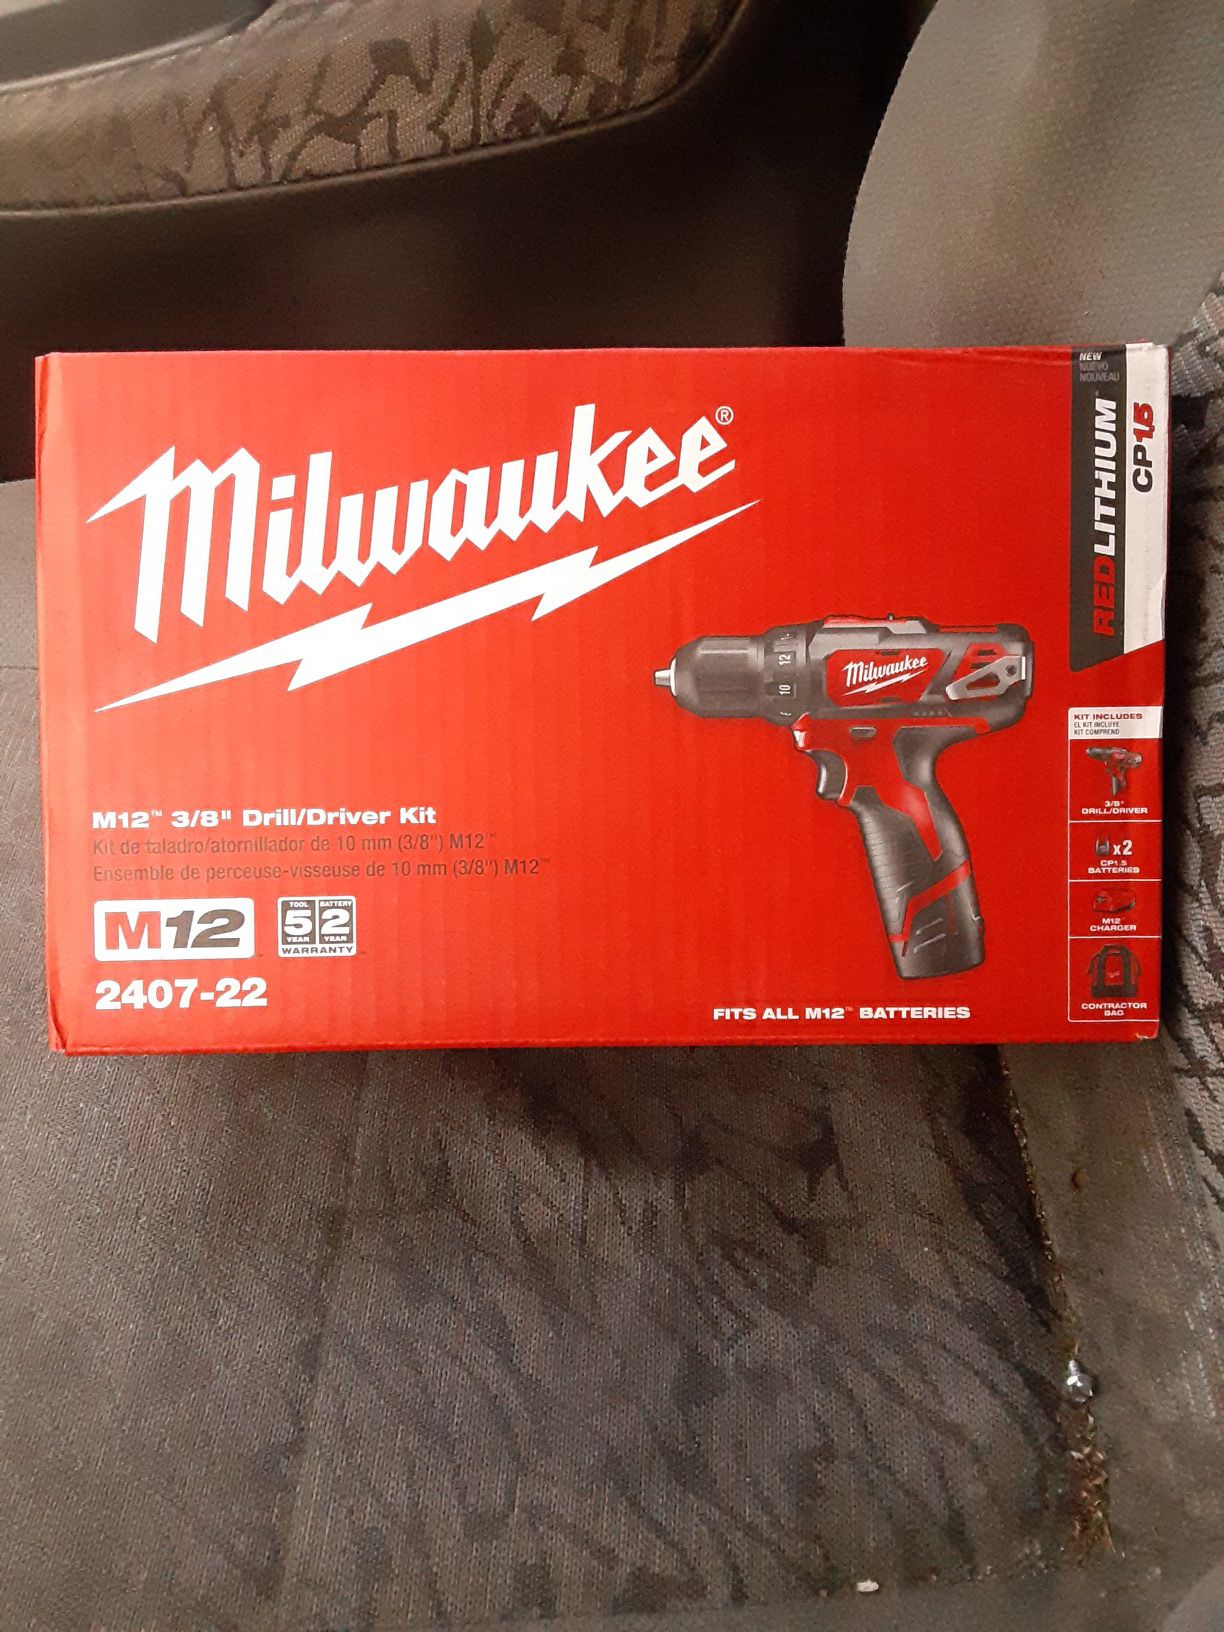 Milwuakee M12 3/8" Drill/Driver Kit